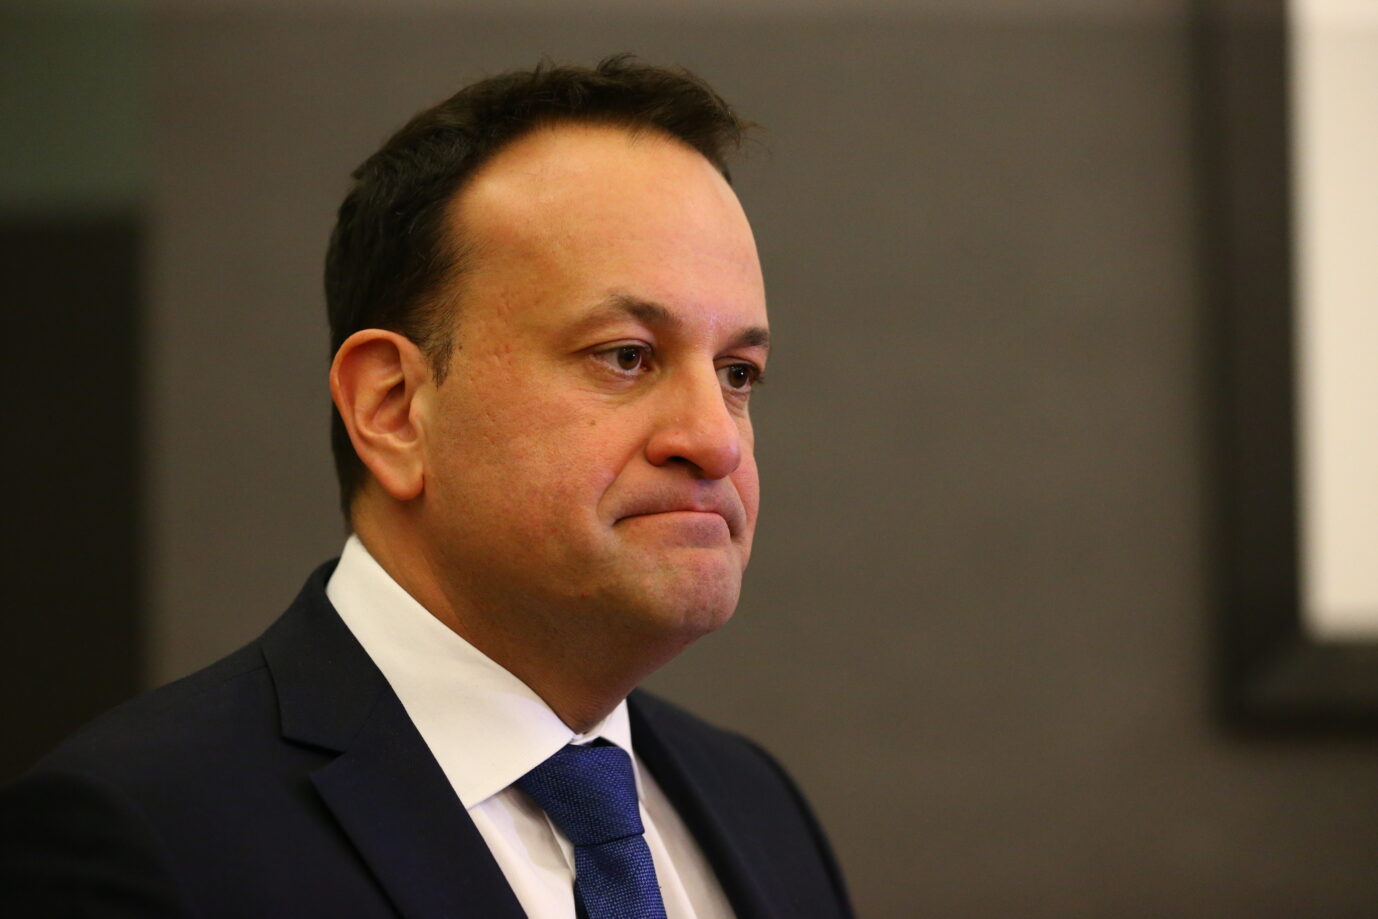 Irish constitution referenda. Taoiseach Leo Varadkar speaking to the media at Dublin Castle as counting for the twin referenda to change the Constitution on family and care continues. The family amendment proposes extending the meaning of family beyond one defined by marriage and to include those based on "durable" relationships. The care amendment proposes deleting references to a woman's roles and duties in the home, and replacing it with a new article that acknowledges family carers. Picture date: Saturday March 9, 2024. See PA story IRISH Family. Photo credit should read: Damien Storan/PA Wire URN:75573456 Verfassungsänderung gescheitert. Iren verpassen ihm eine herbe Niederlage.